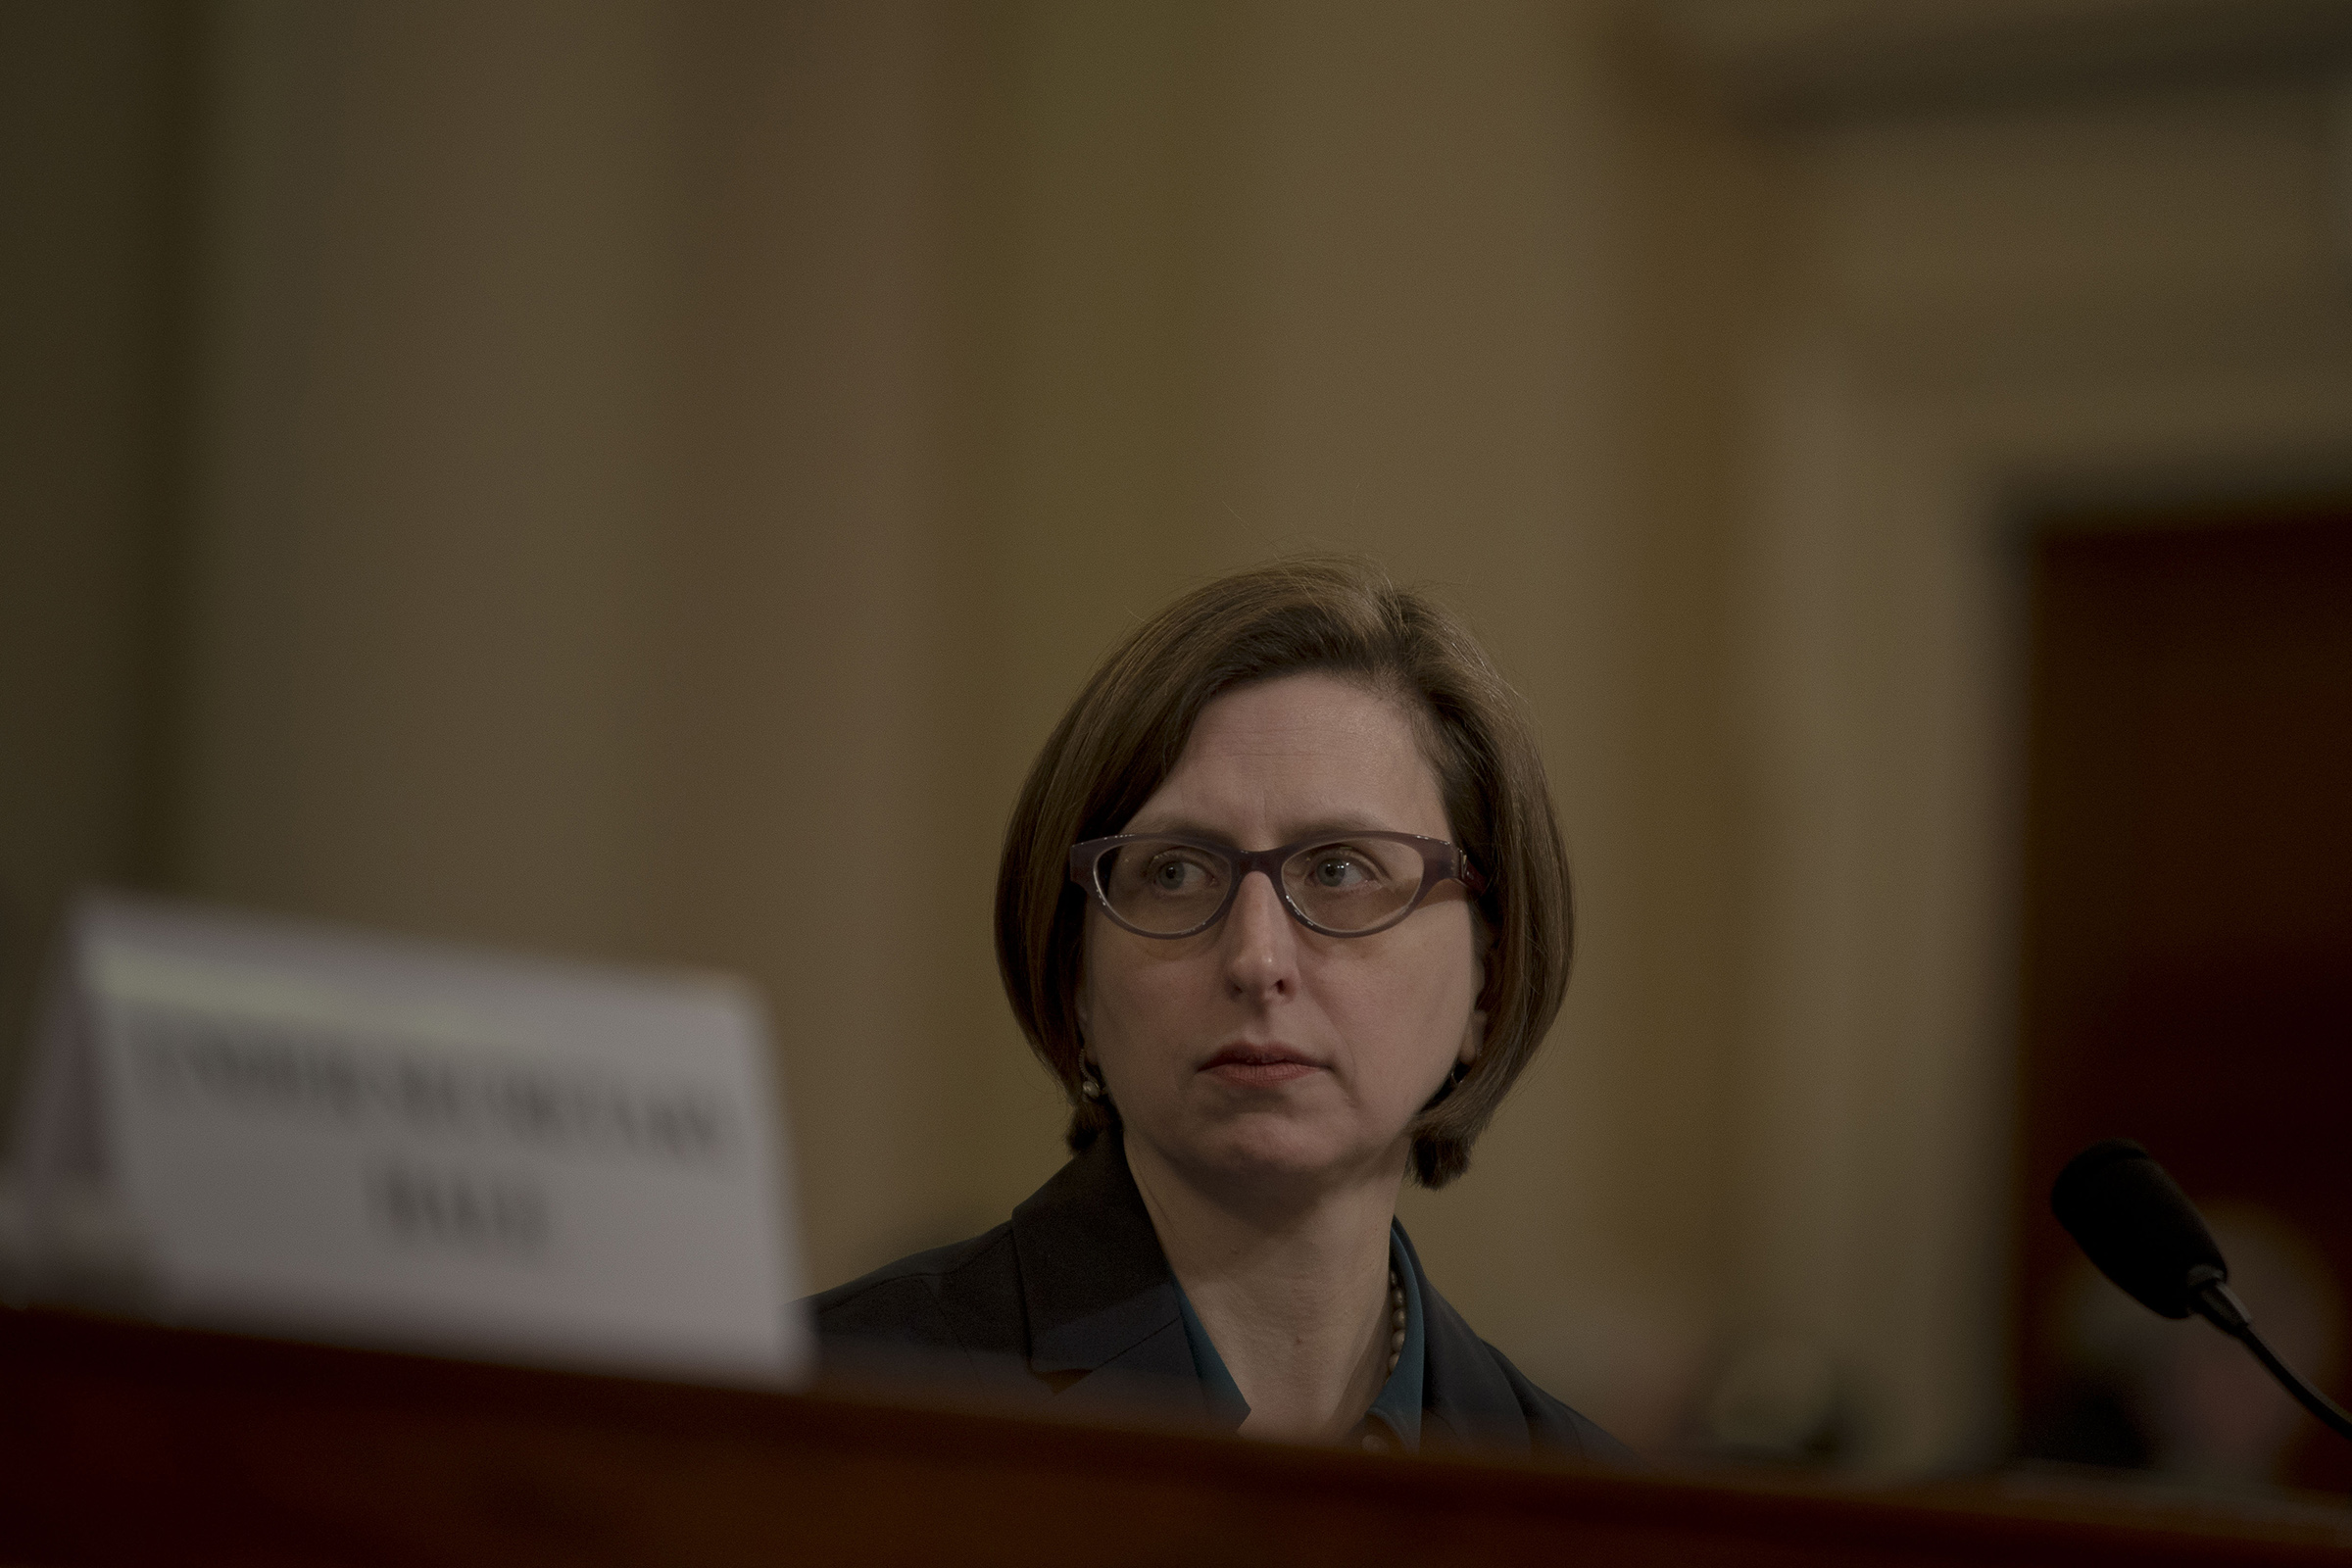 11/20/19, Capitol Hill, Washington, D.C. Laura Cooper, the deputy assistant secretary of defense for Russia, Ukraine and Eurasia testifies during the House Intelligence Committee hearing on the impeachment inquiry at the Longworth House Office building on Capitol Hill in Washington, D.C. on Nov. 20, 2019.Gabriella Demczuk / TIME